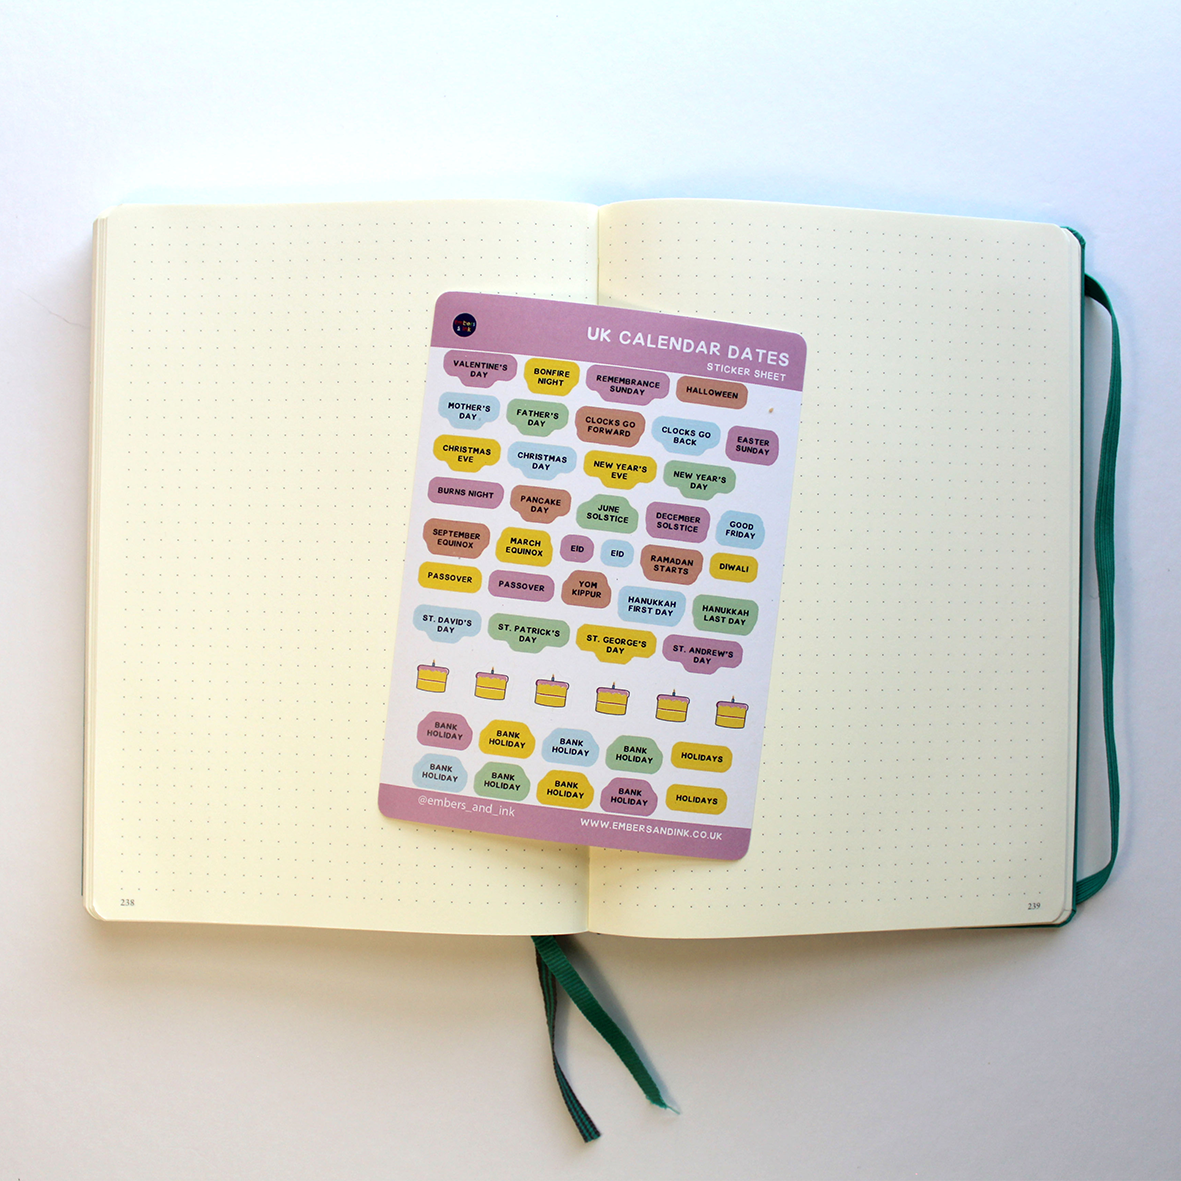 The sticker sheet is shown laying on top of the open pages of a blank planner, Ready for some Bullet Journalling.